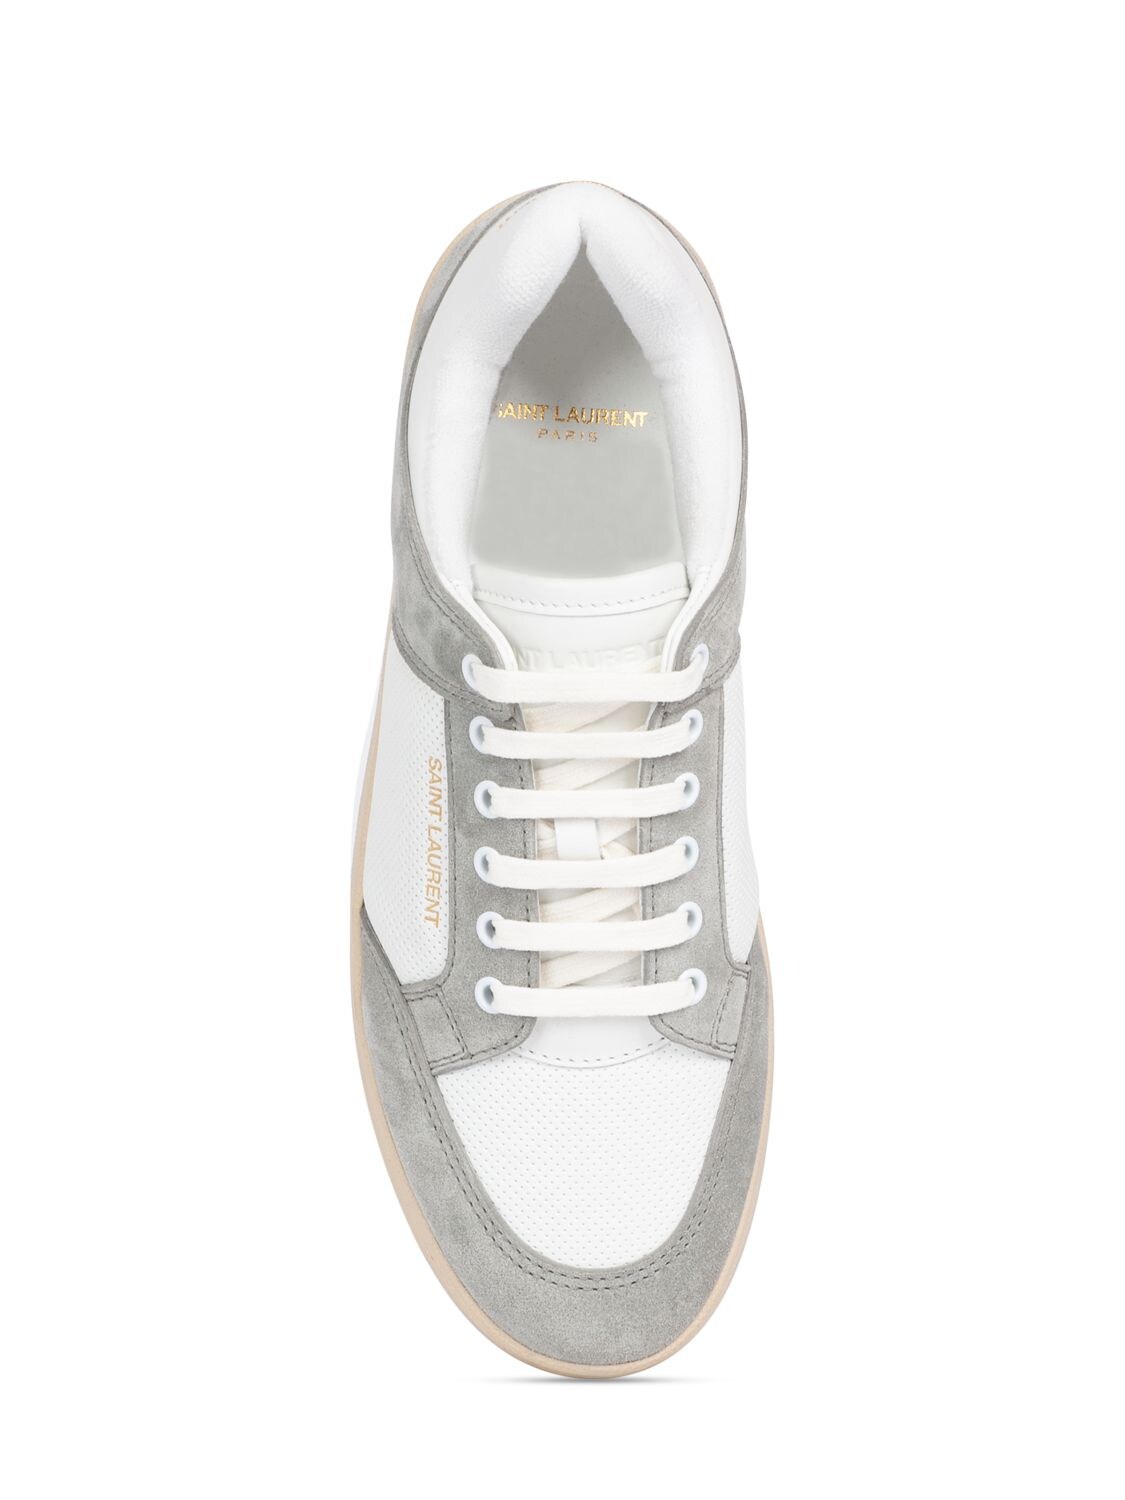 Shop Saint Laurent Sl/61 Leather Sneakers In White,grey